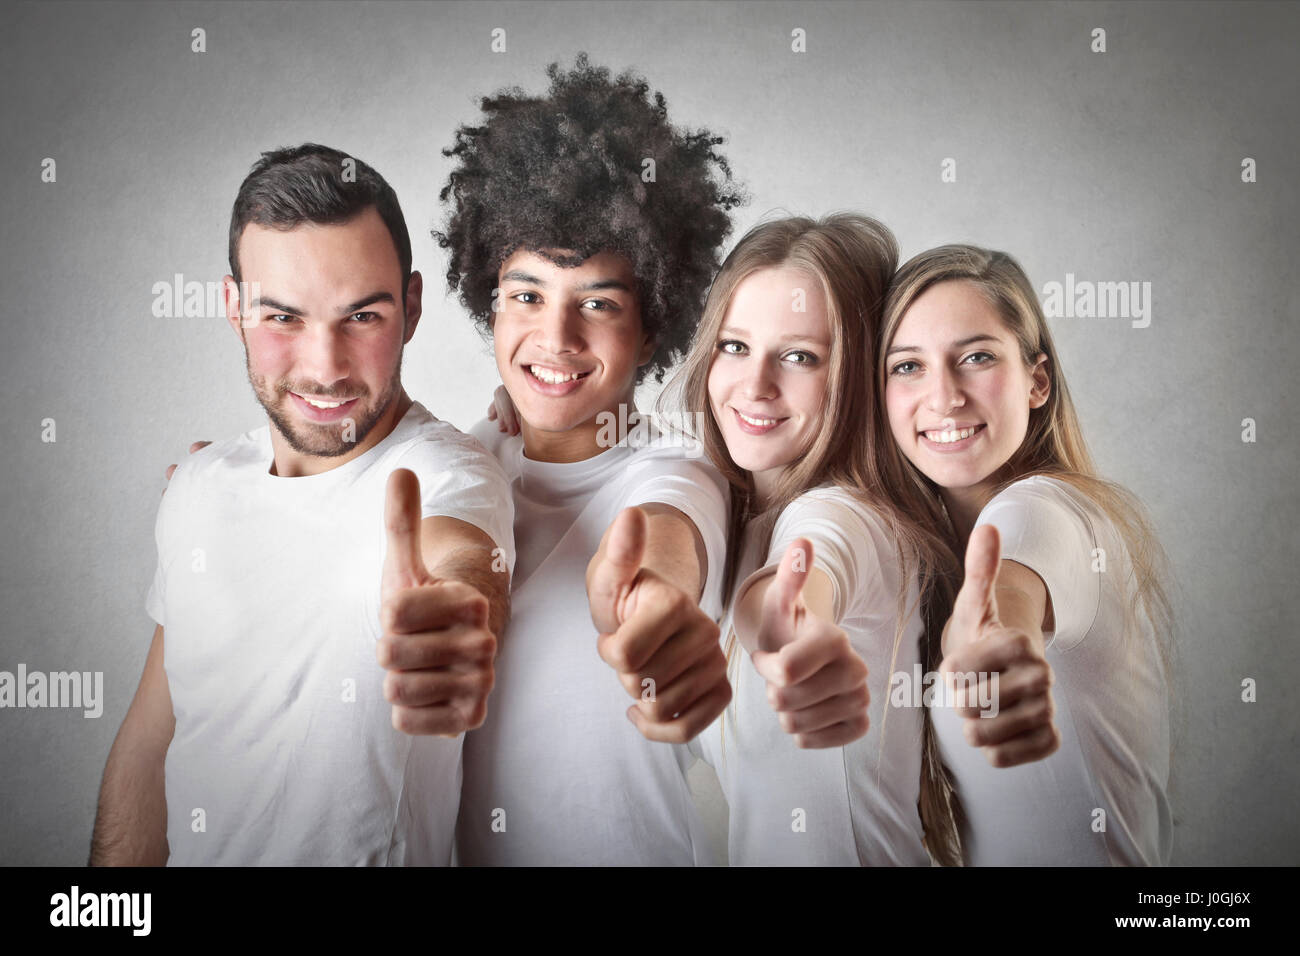 2 men and women supporting you Stock Photo